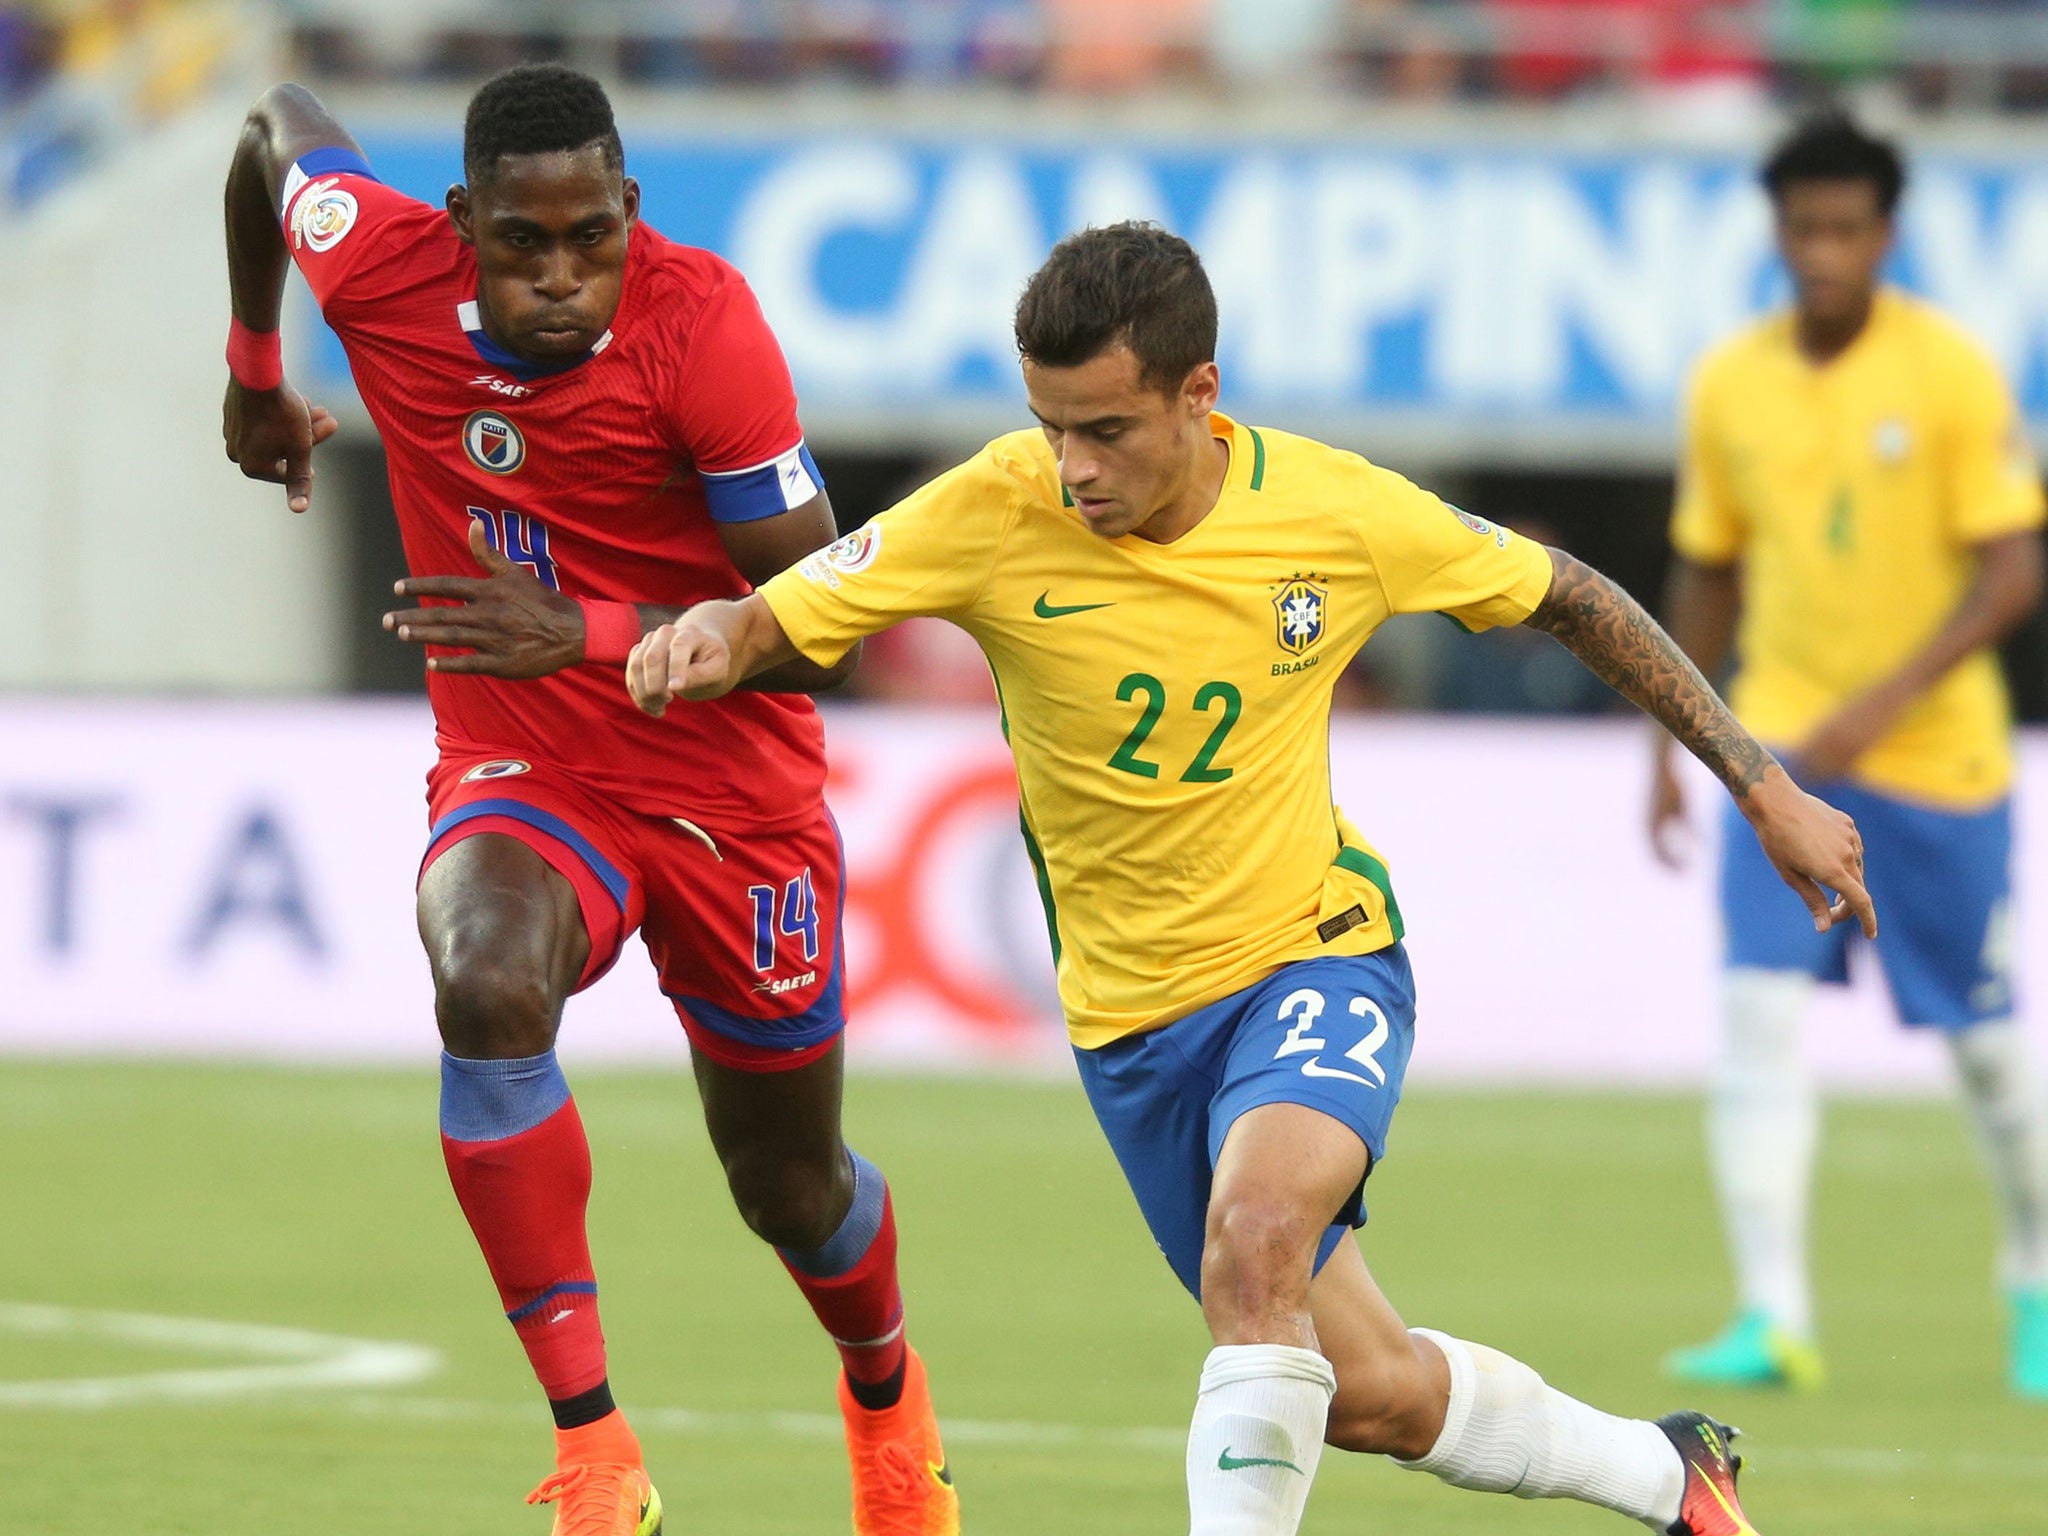 Coutinho notched his first international hat-trick to send Brazil top of Group B